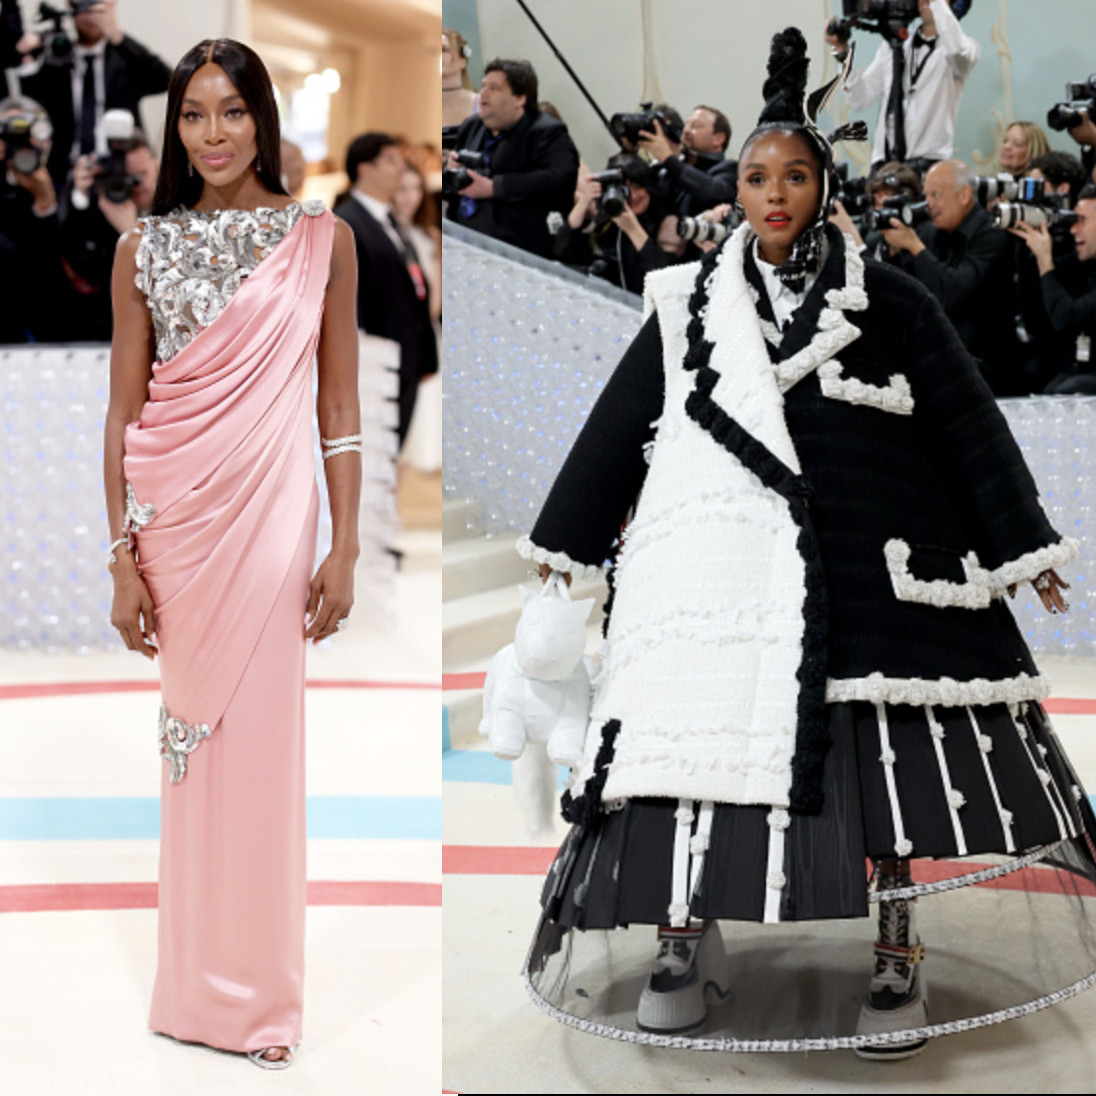 The 2023 Met Gala: Everything You Need To Know - EBONY